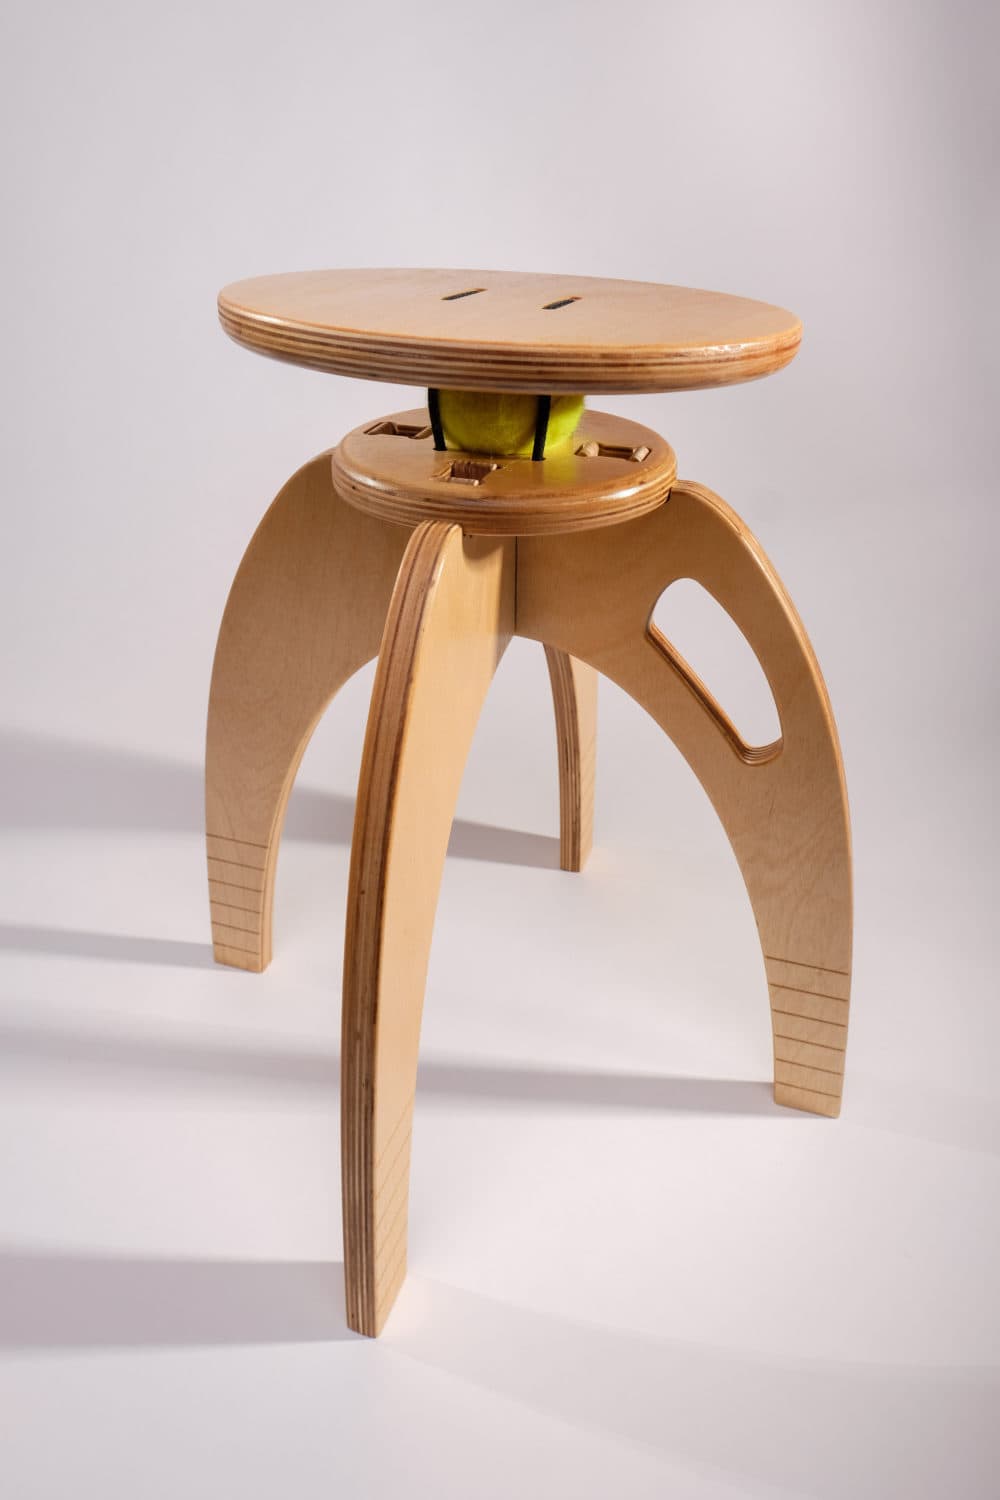 A ButtOn Chair for kids made with a tennis ball. Users found that tennis balls collapsed over time, so lacrosse balls were substituted. (Courtesy of QOR360)